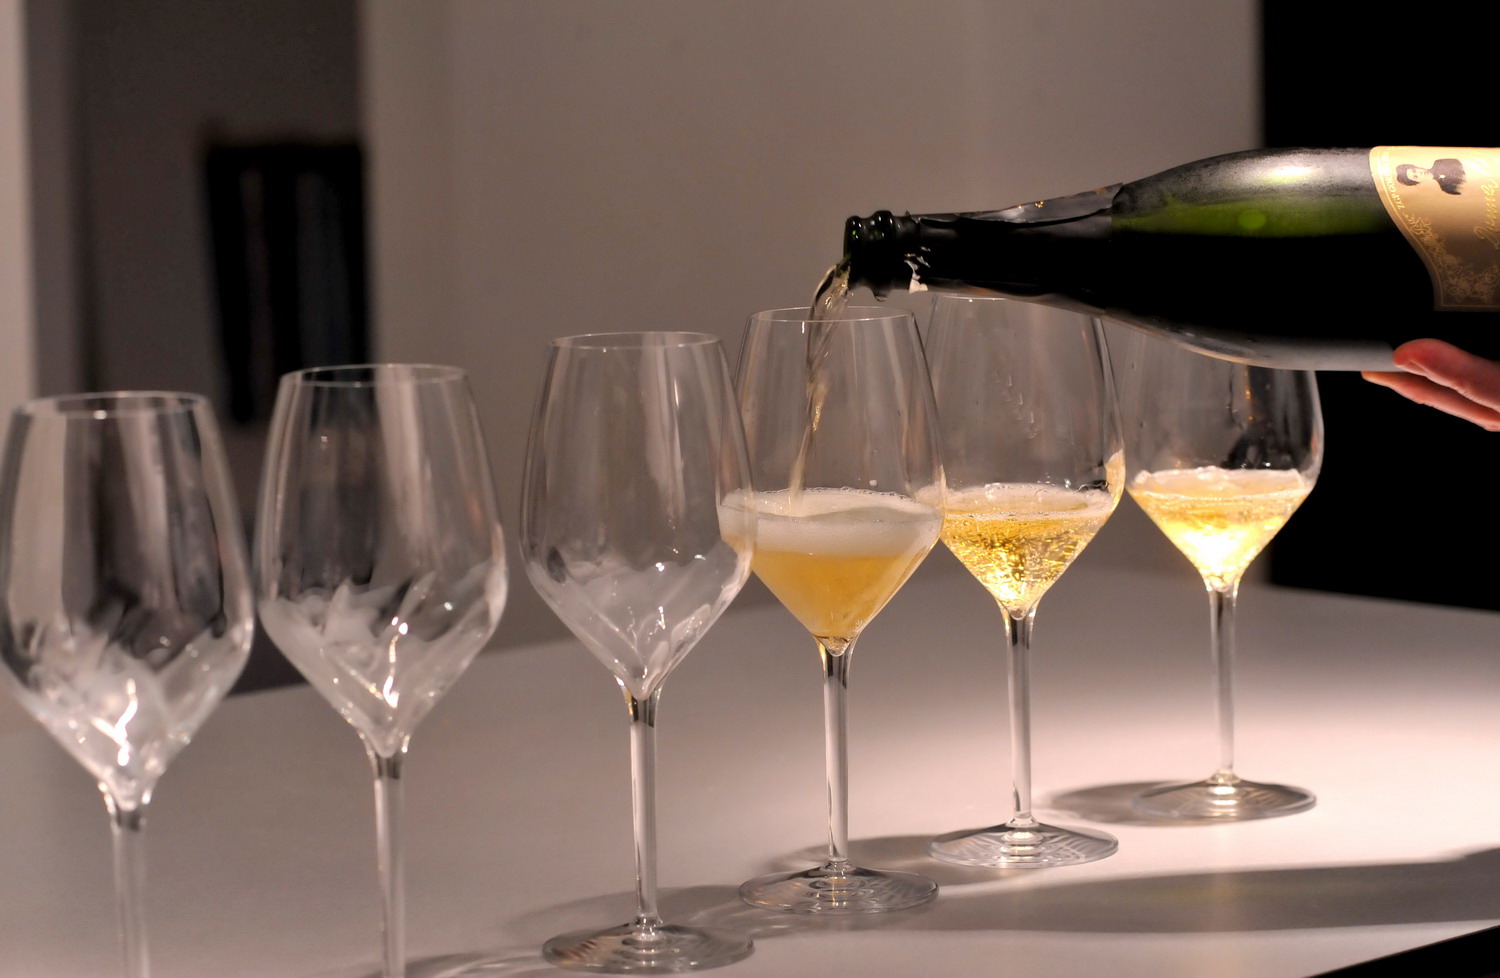 3. Salon of Sparkling wines – Sparkling table #9